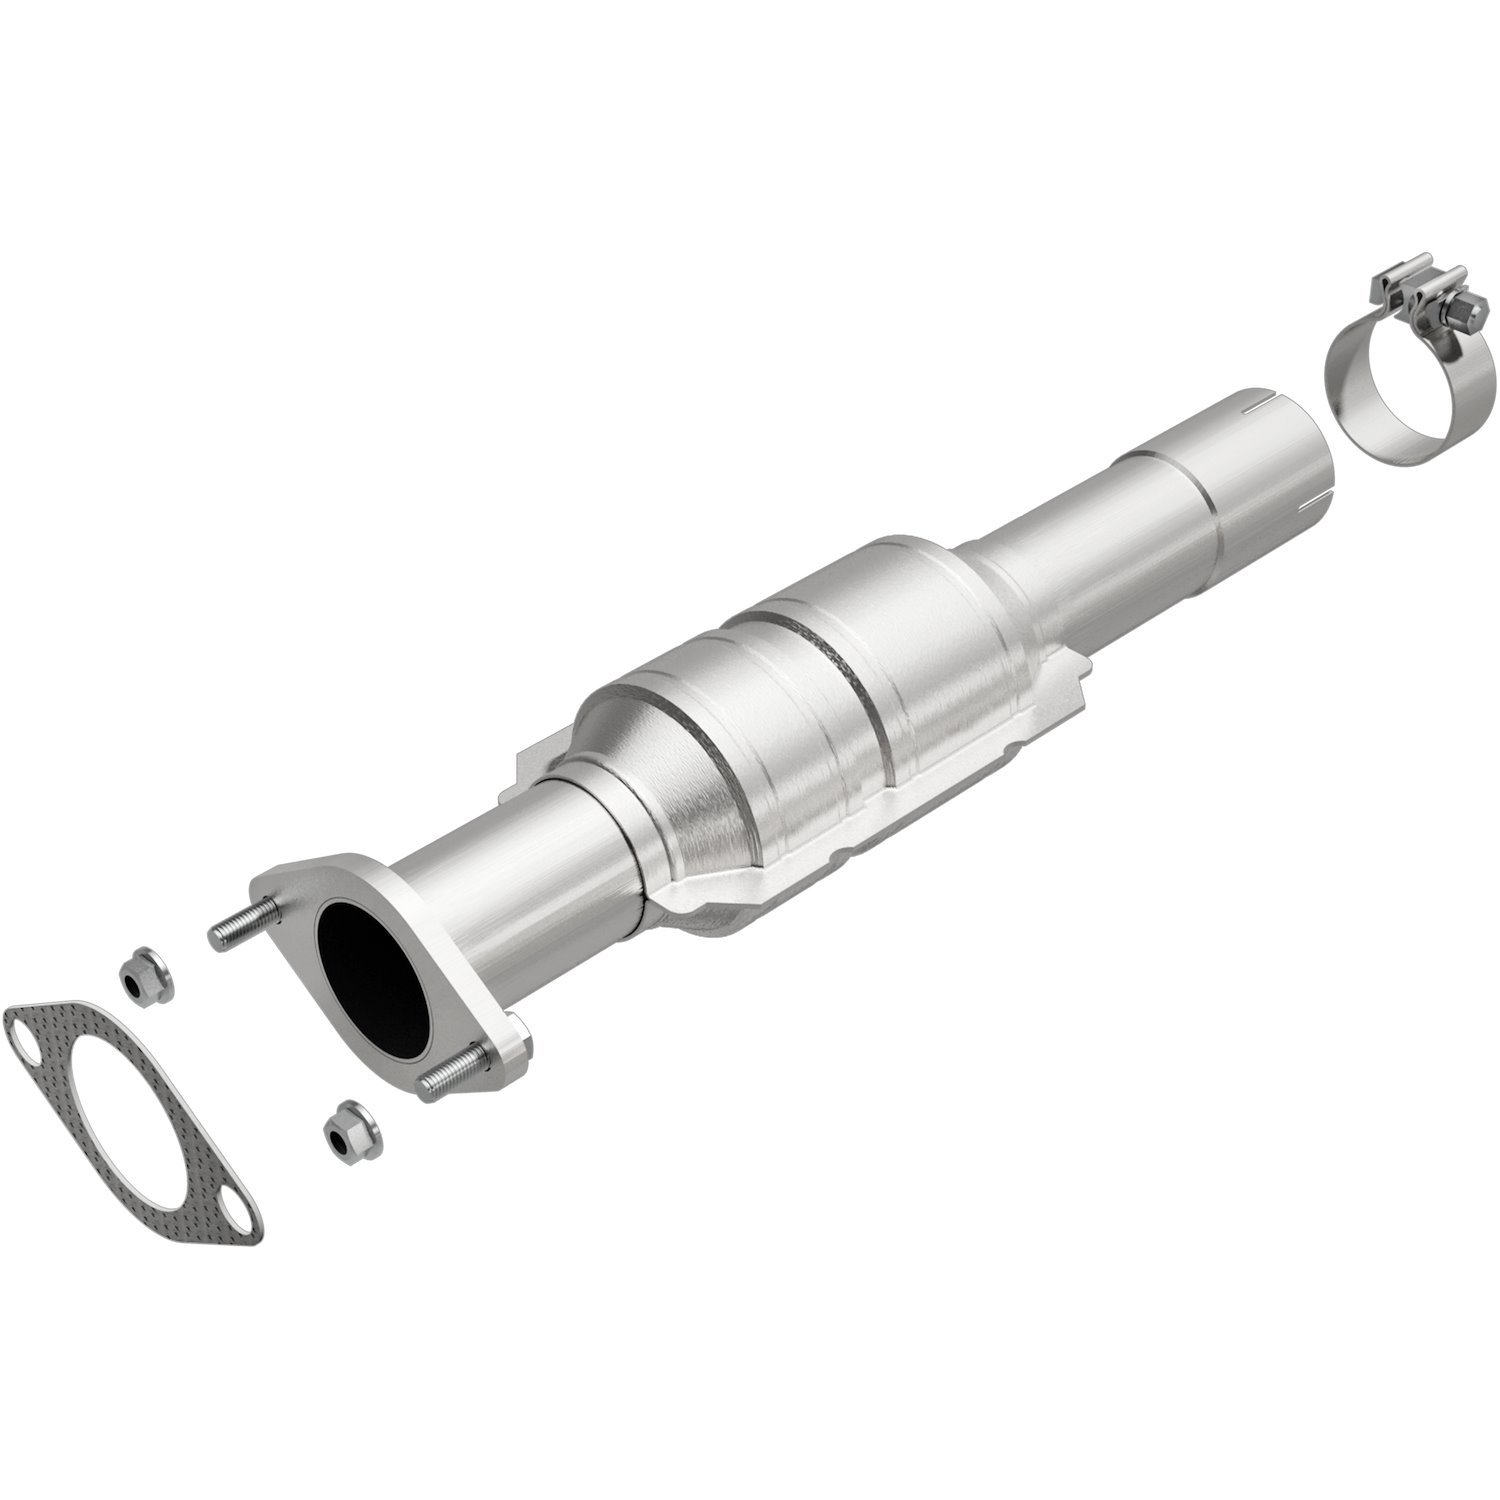 OEM Grade Federal / EPA Compliant Direct-Fit Catalytic Converter 52107